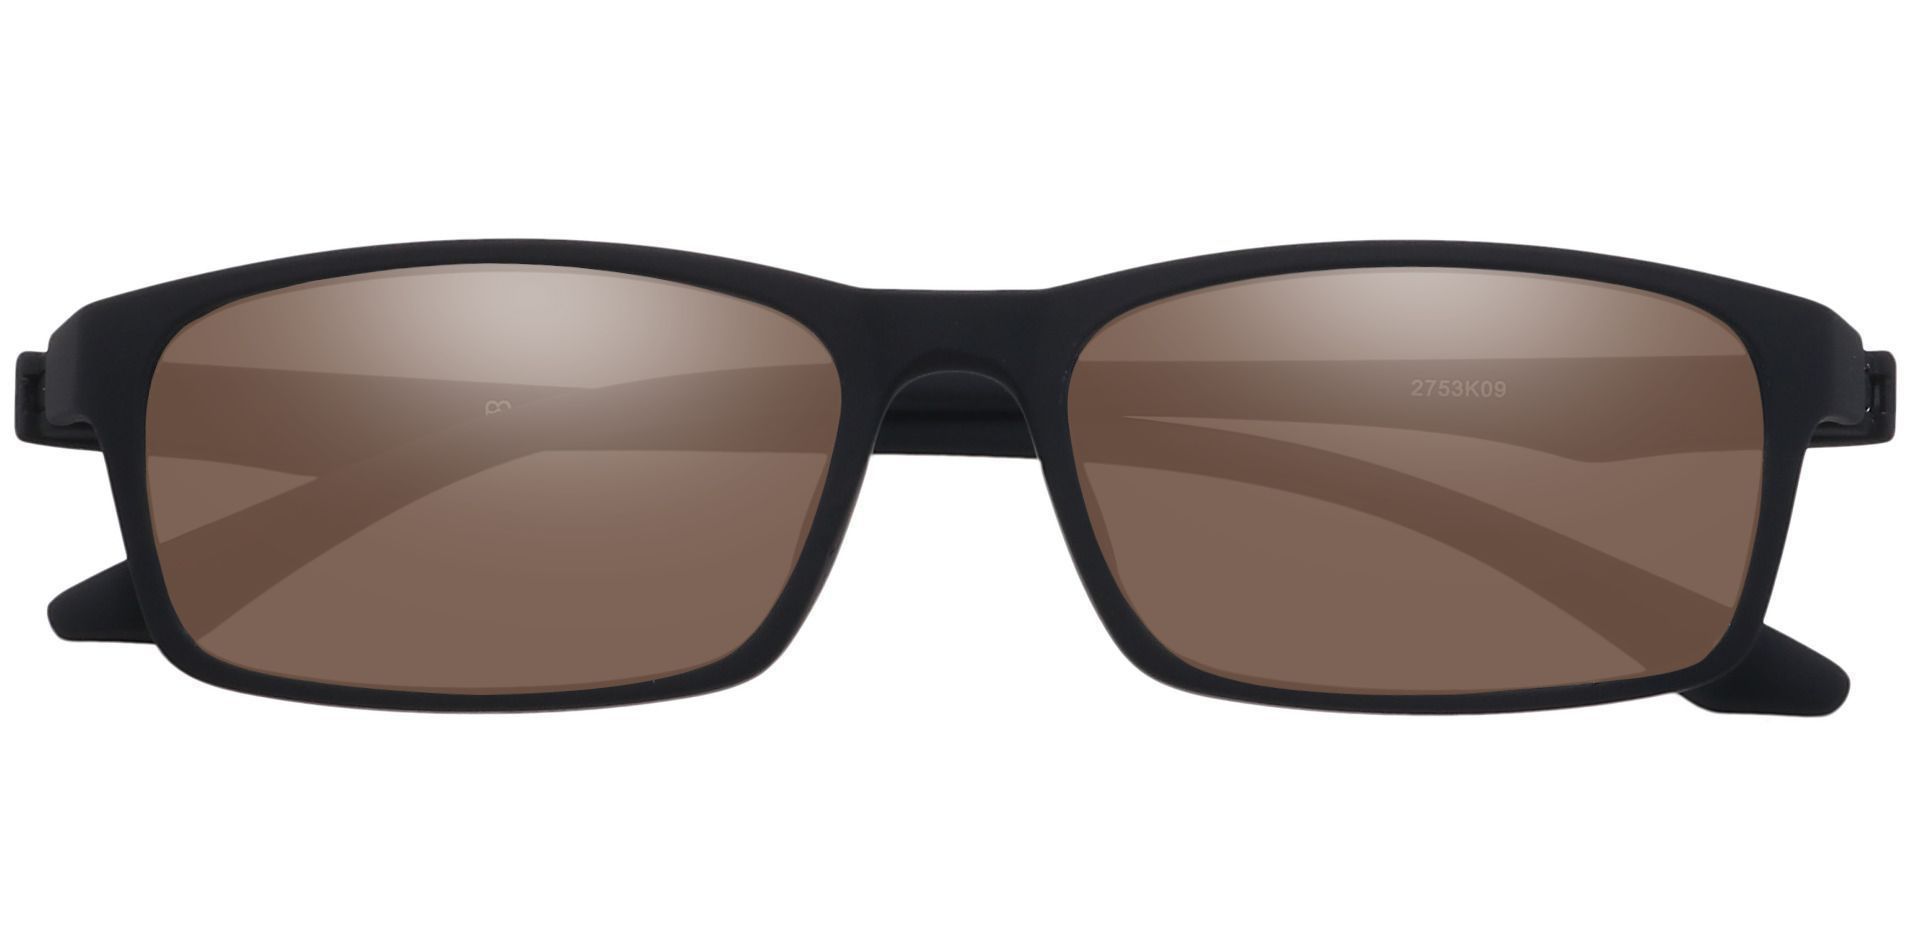 Poplar Rectangle Non-Rx Sunglasses - Black Frame With Brown Lenses